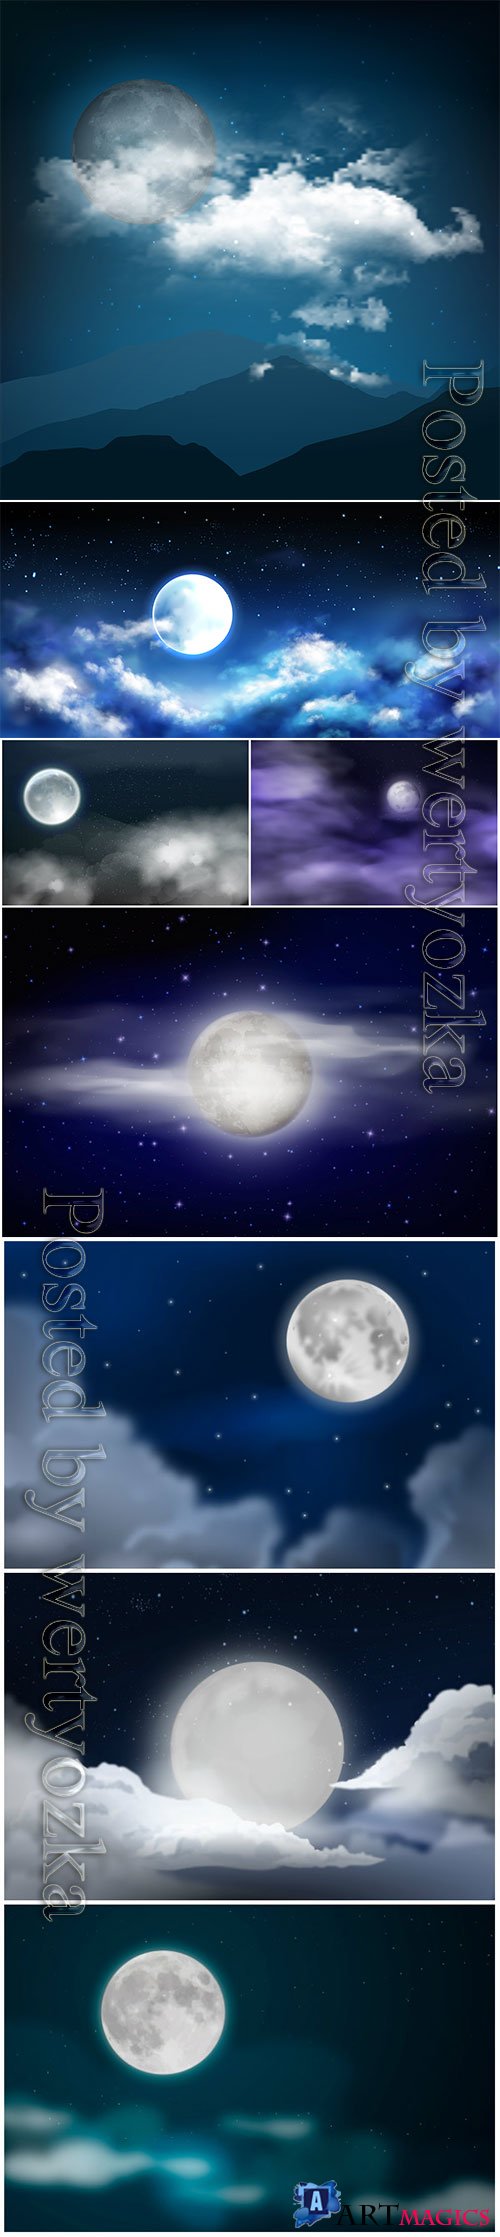 Moon, night sky, stars and clouds vector illustration